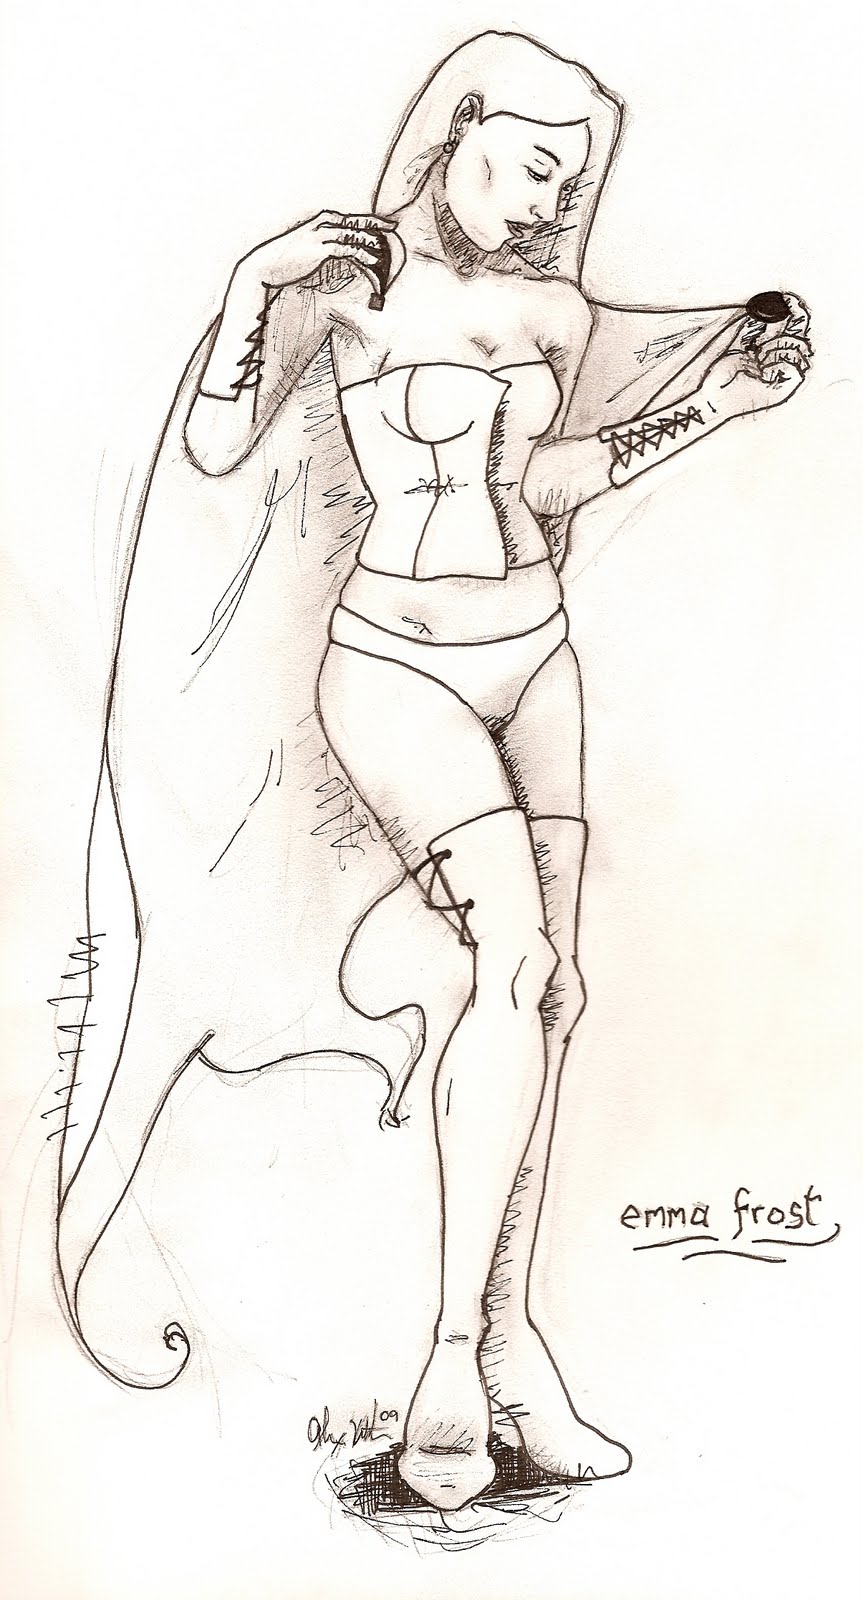 Emma Frost shown here as the